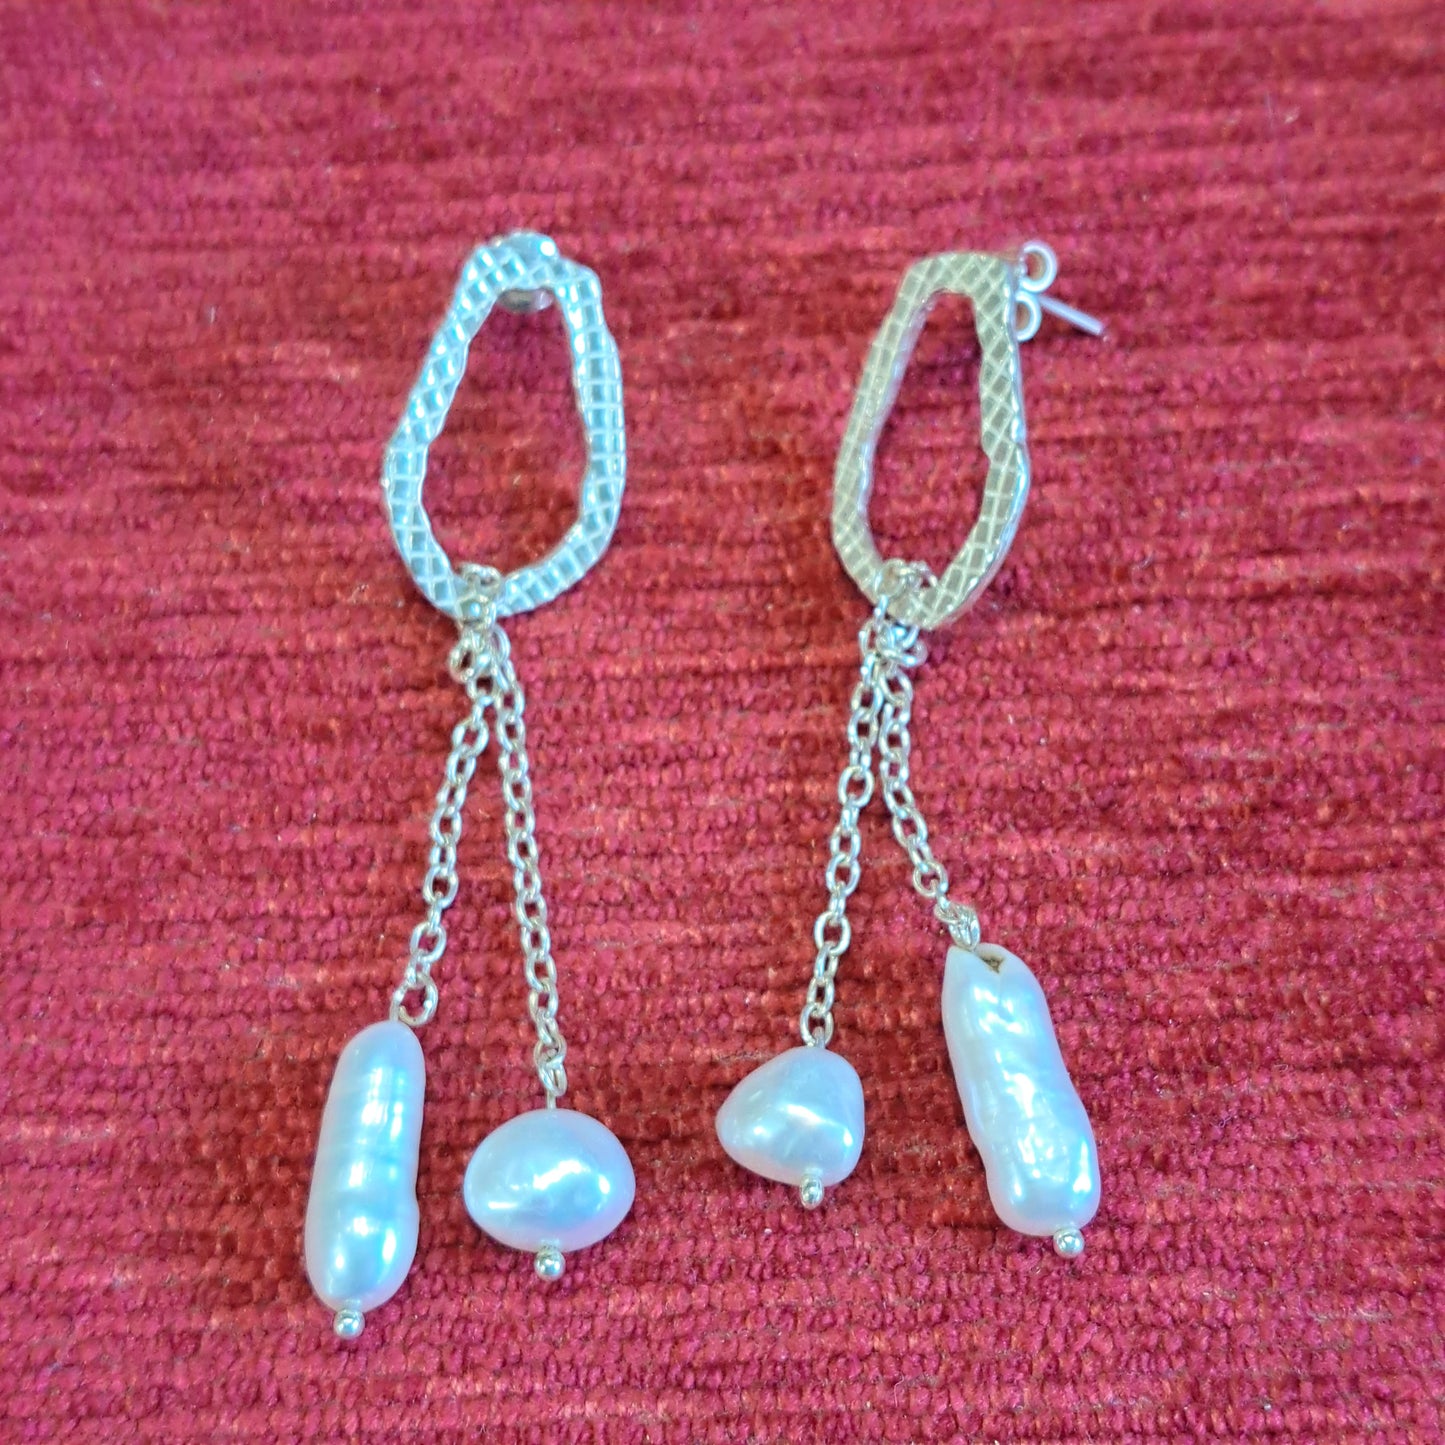 Sterling silver earrings with chains and pearls